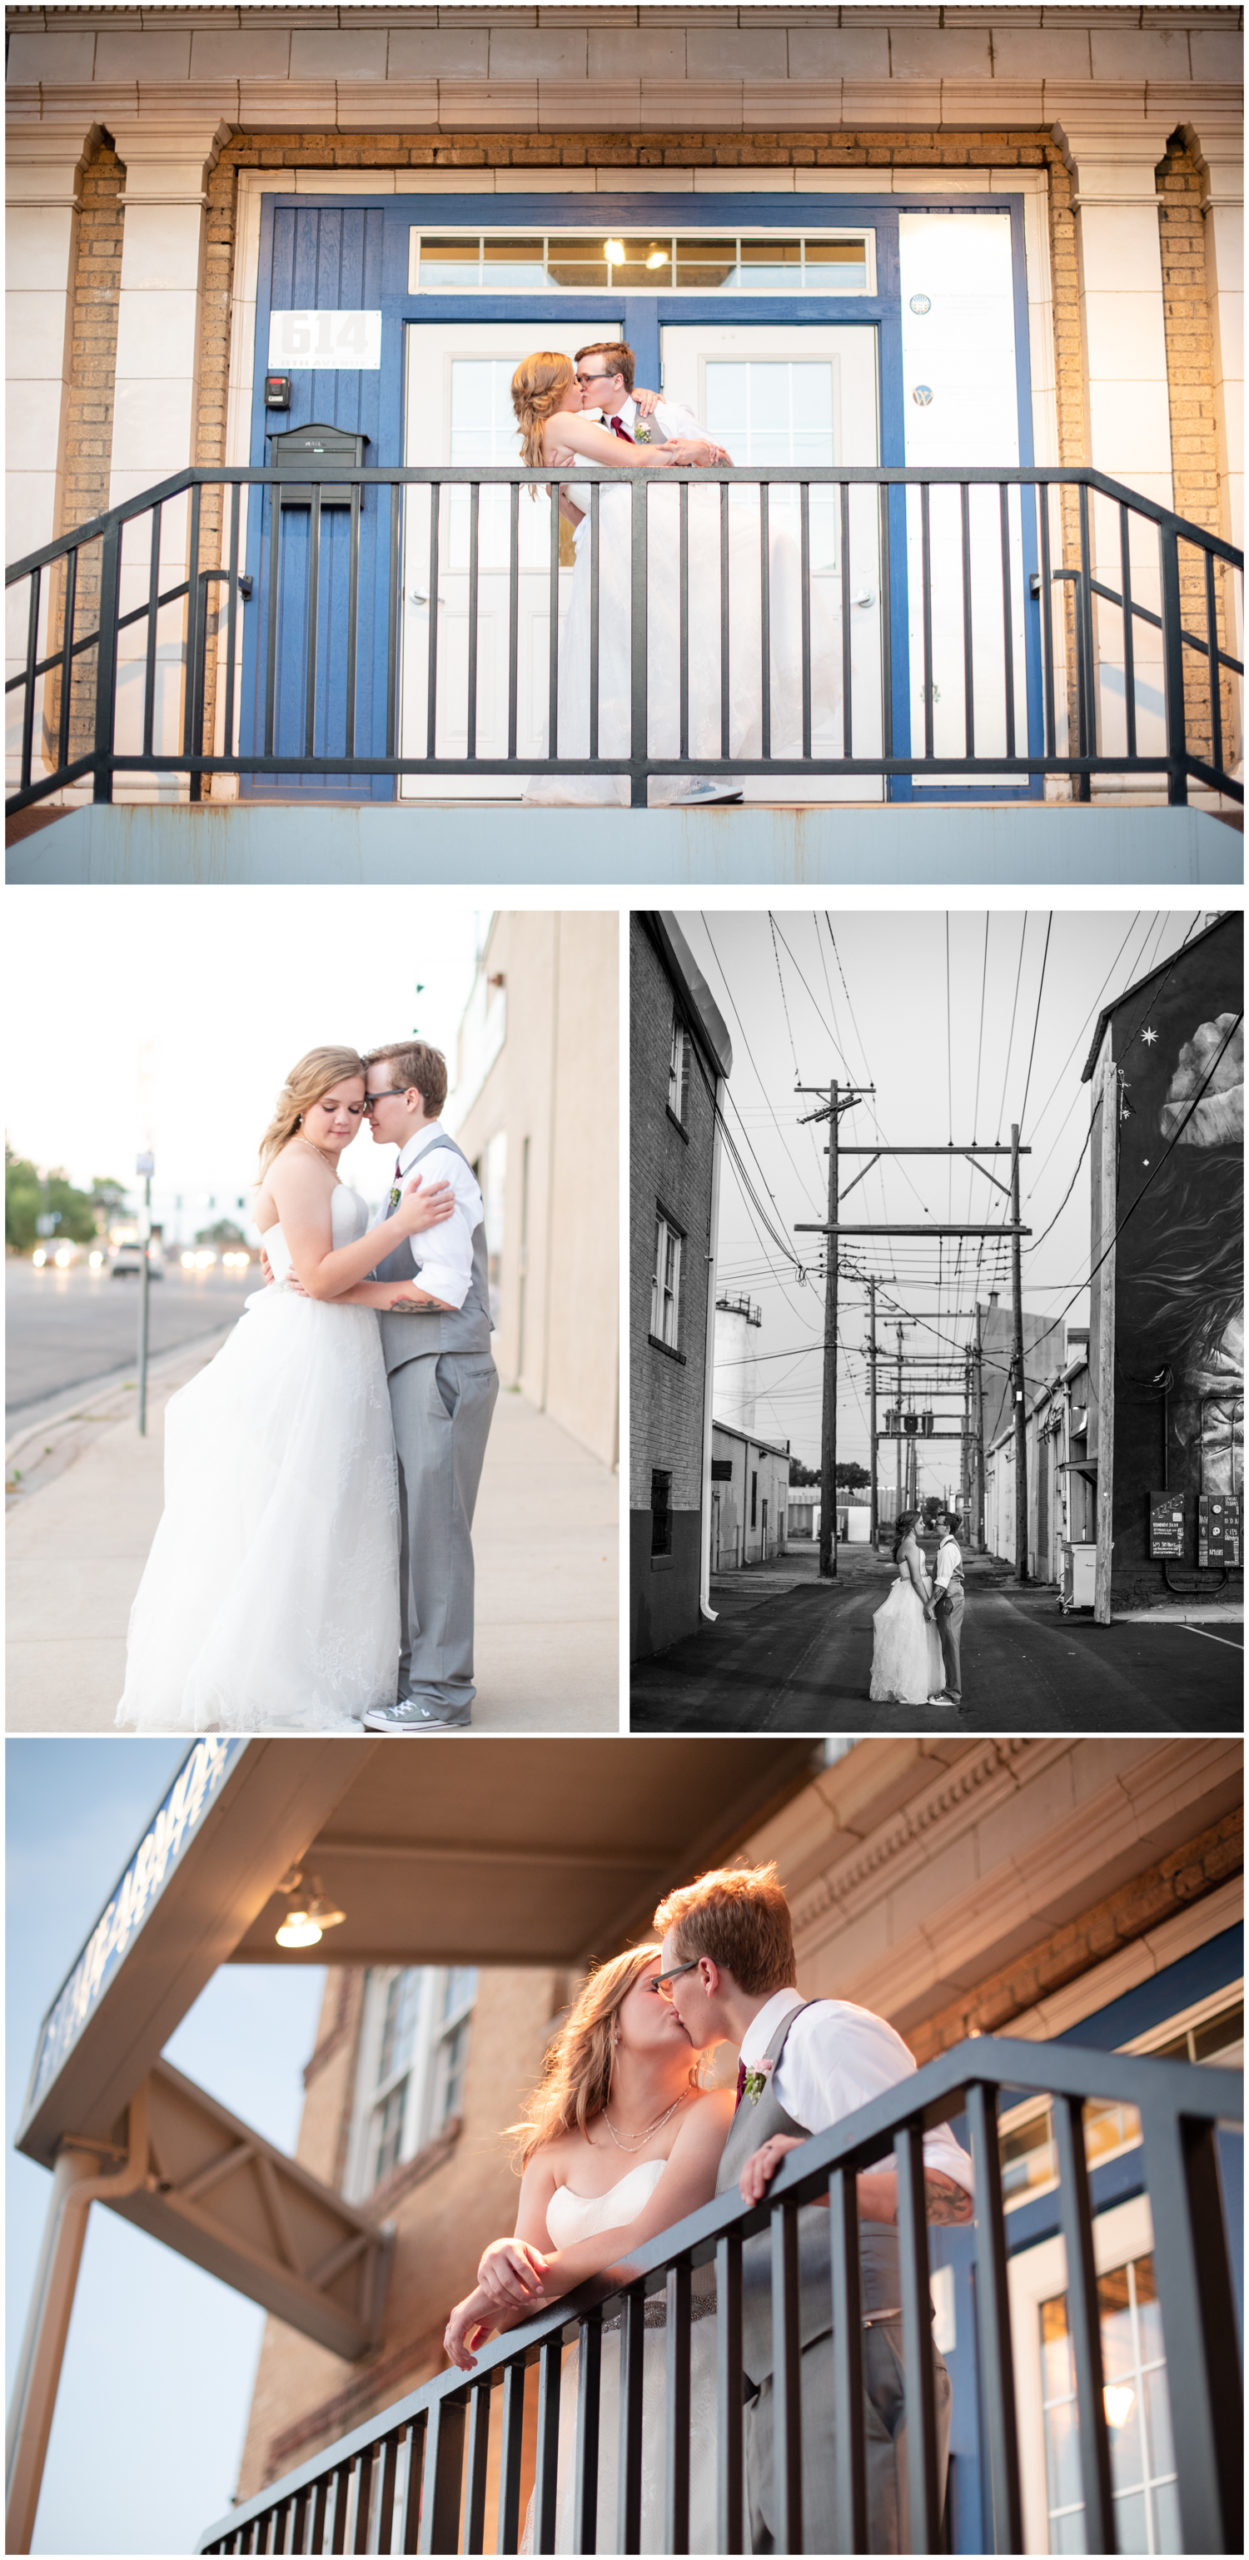 Summer Wedding in Greeley at Glenmere Park and The Armory | Britni Girard Photography - Wedding Photographer - Bride and Groom